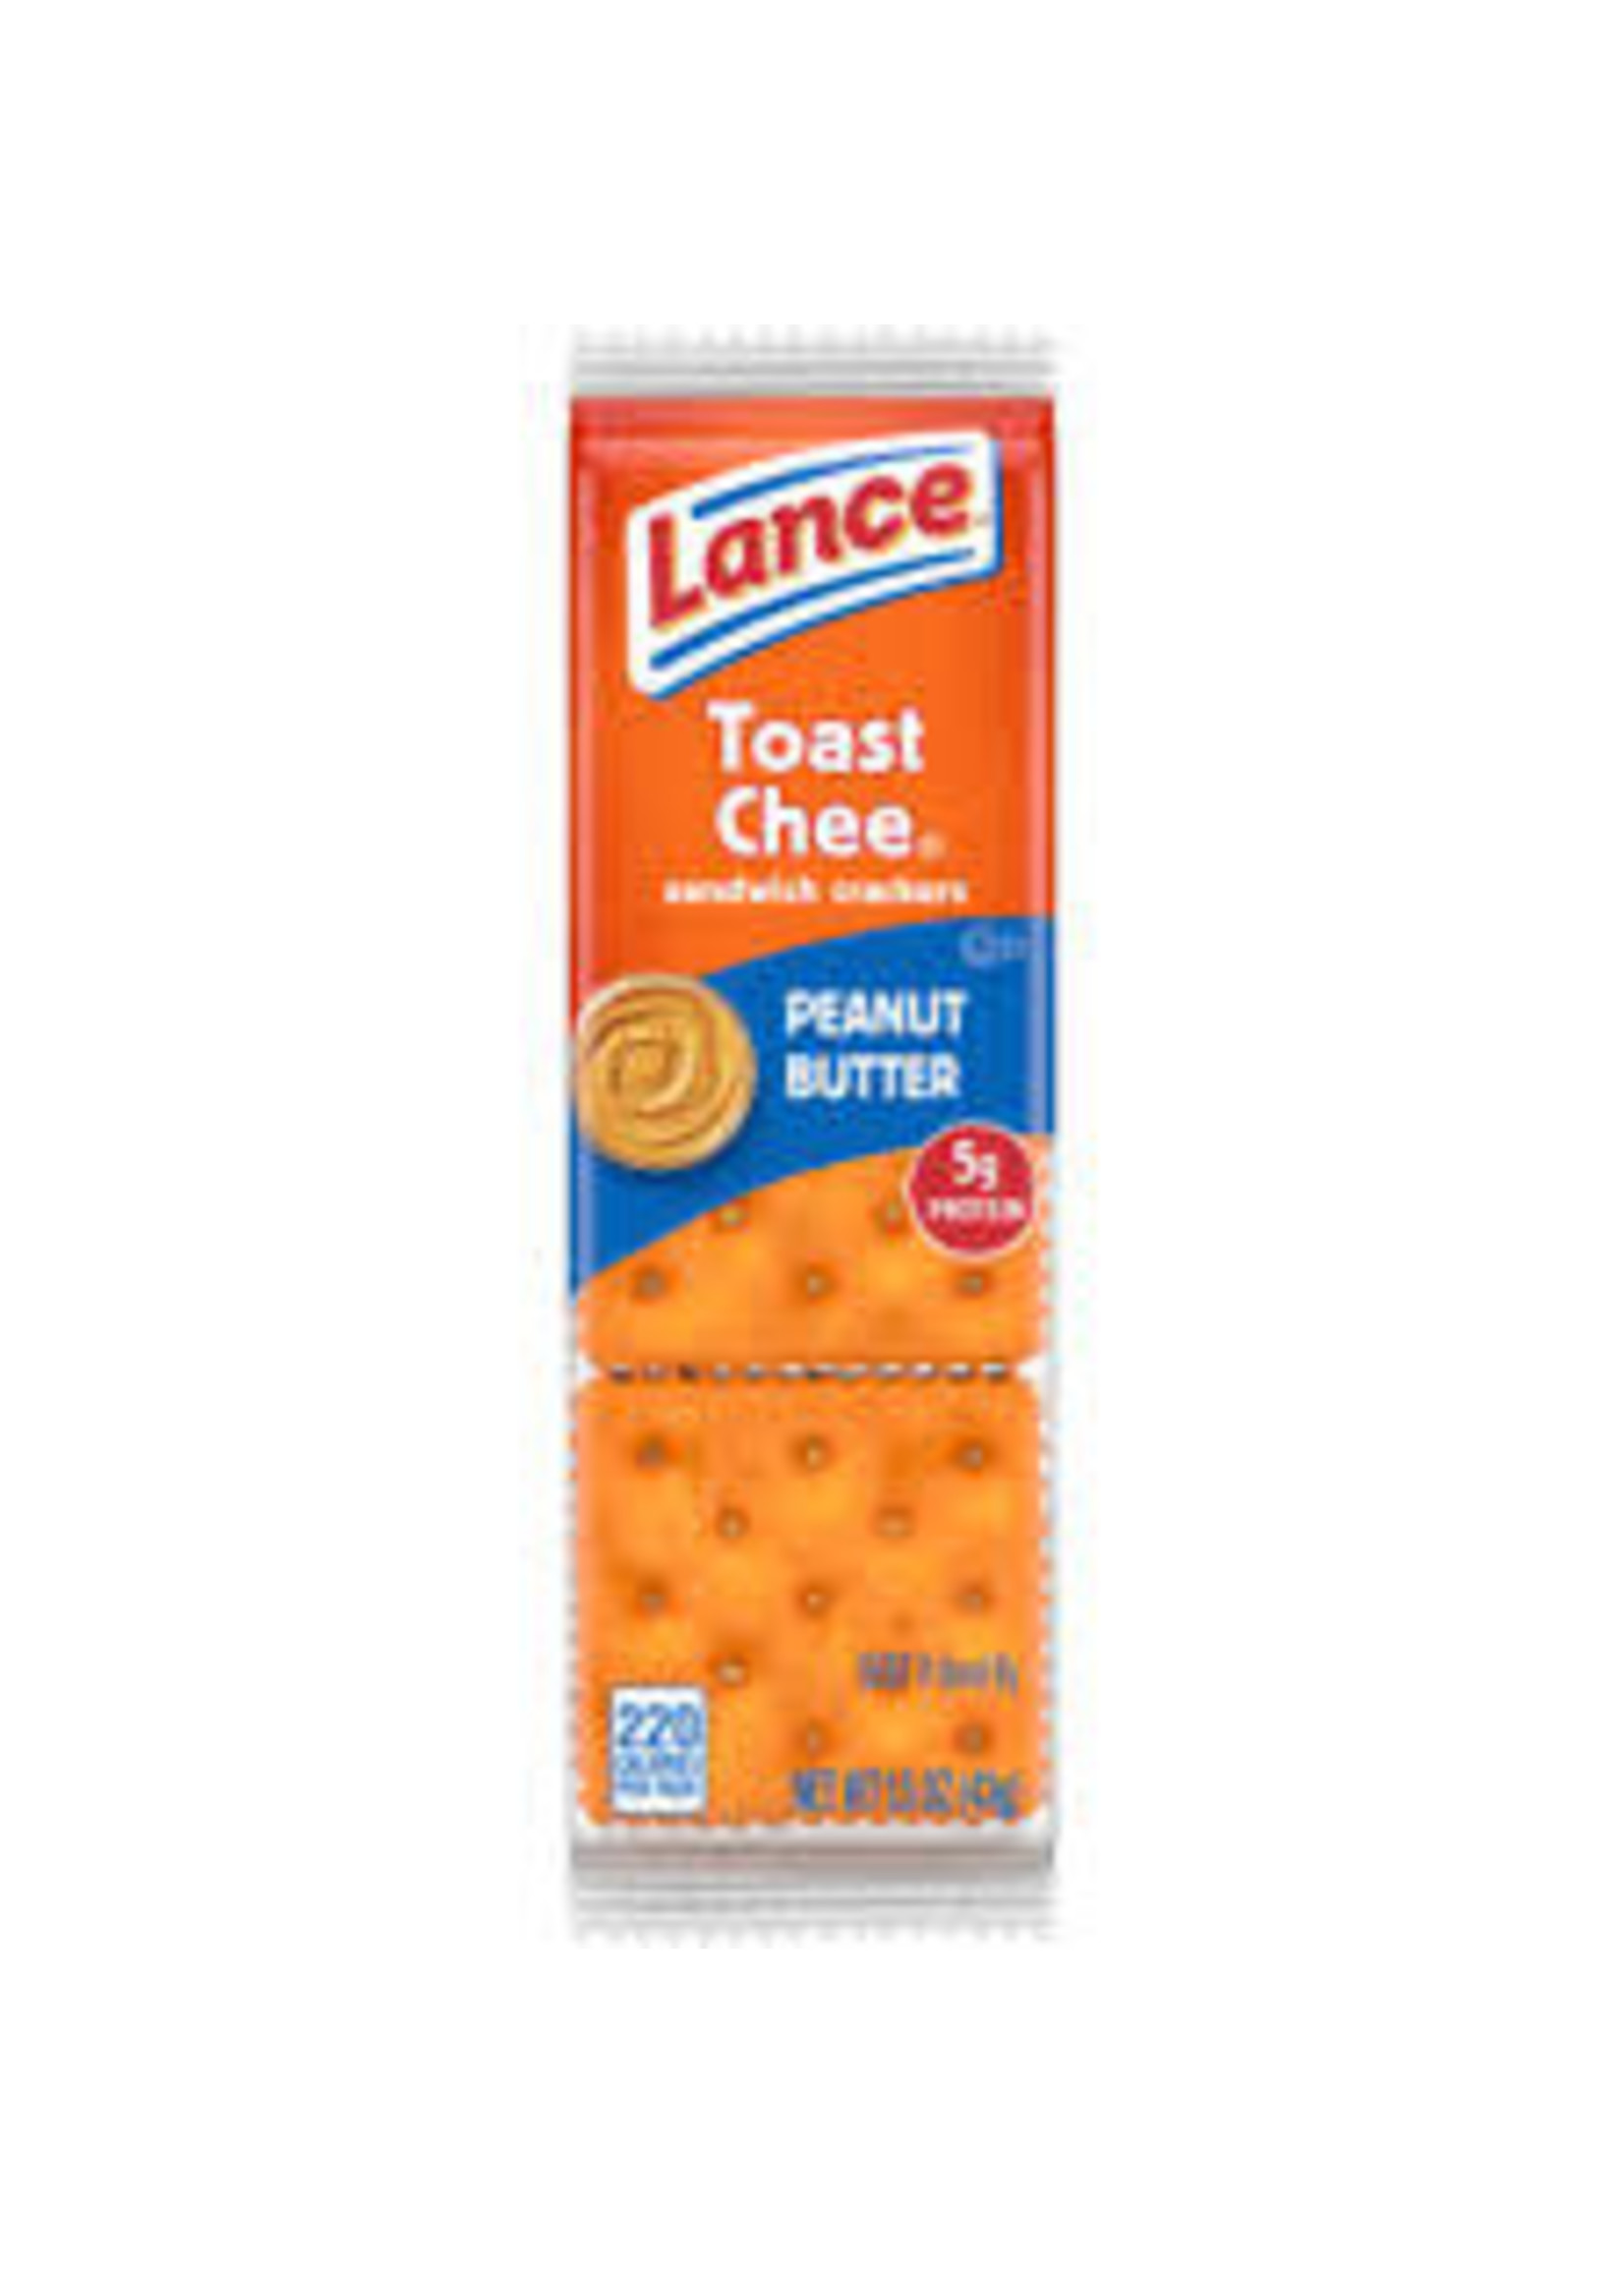 Toast Chee Peanut butter Crackers